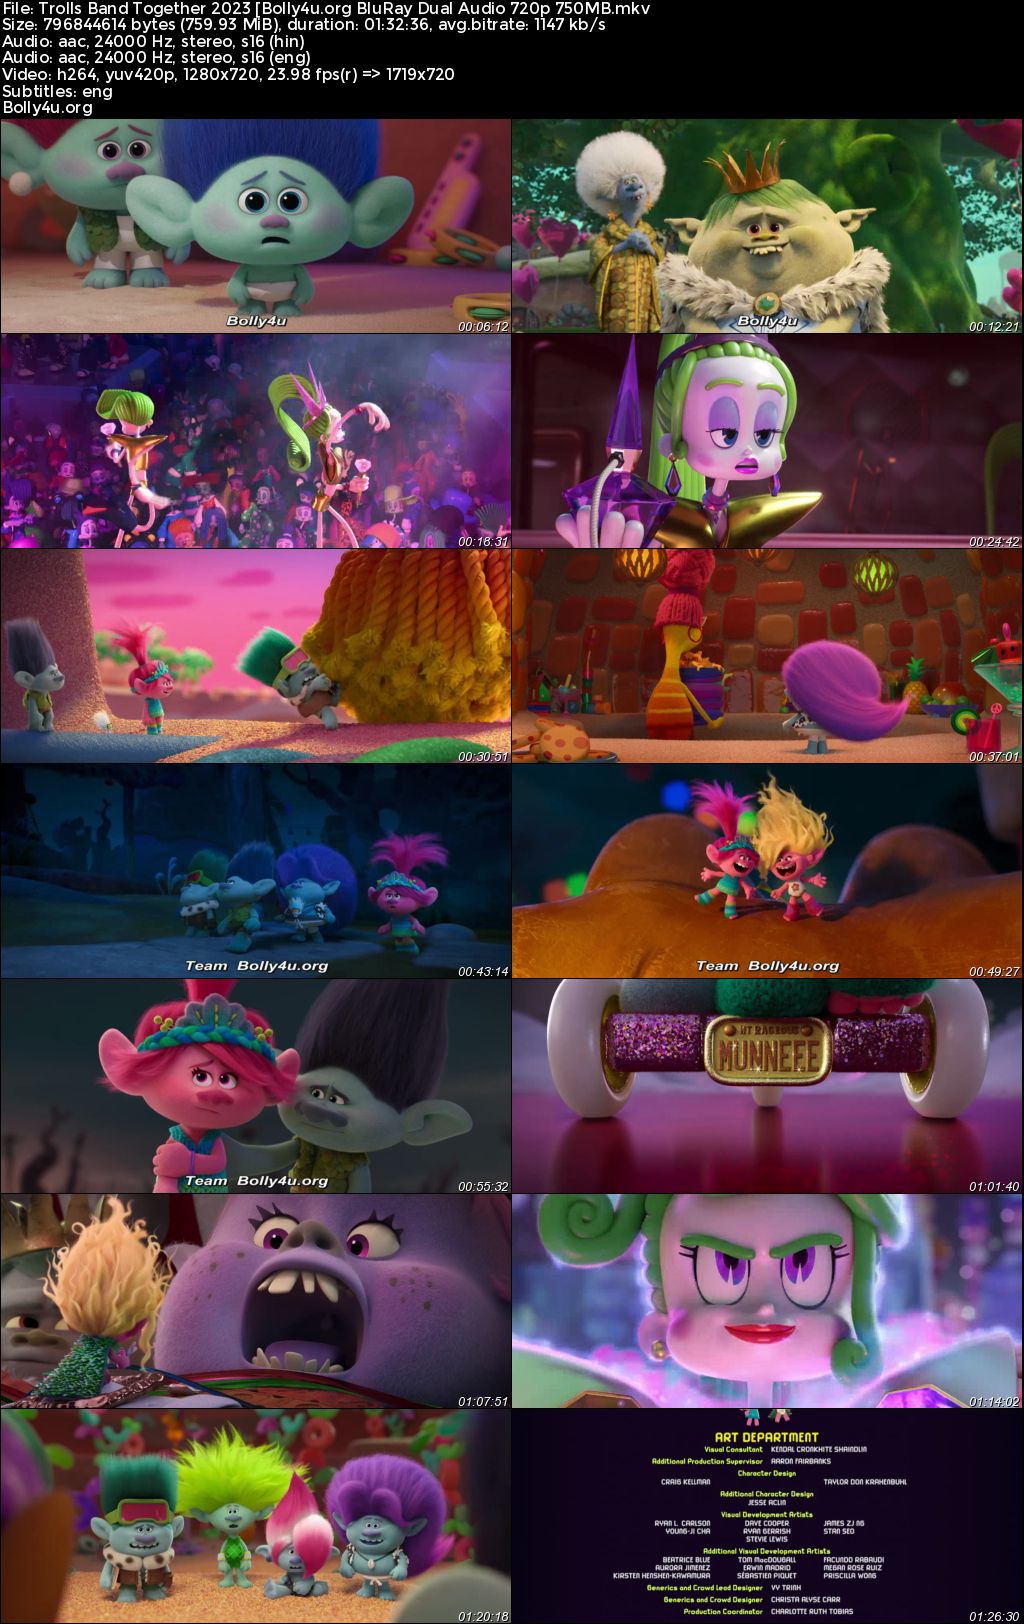 Trolls Band Together 2023 WEB-DL Hindi Dual Audio ORG Full Movie Download 1080p 720p 480p